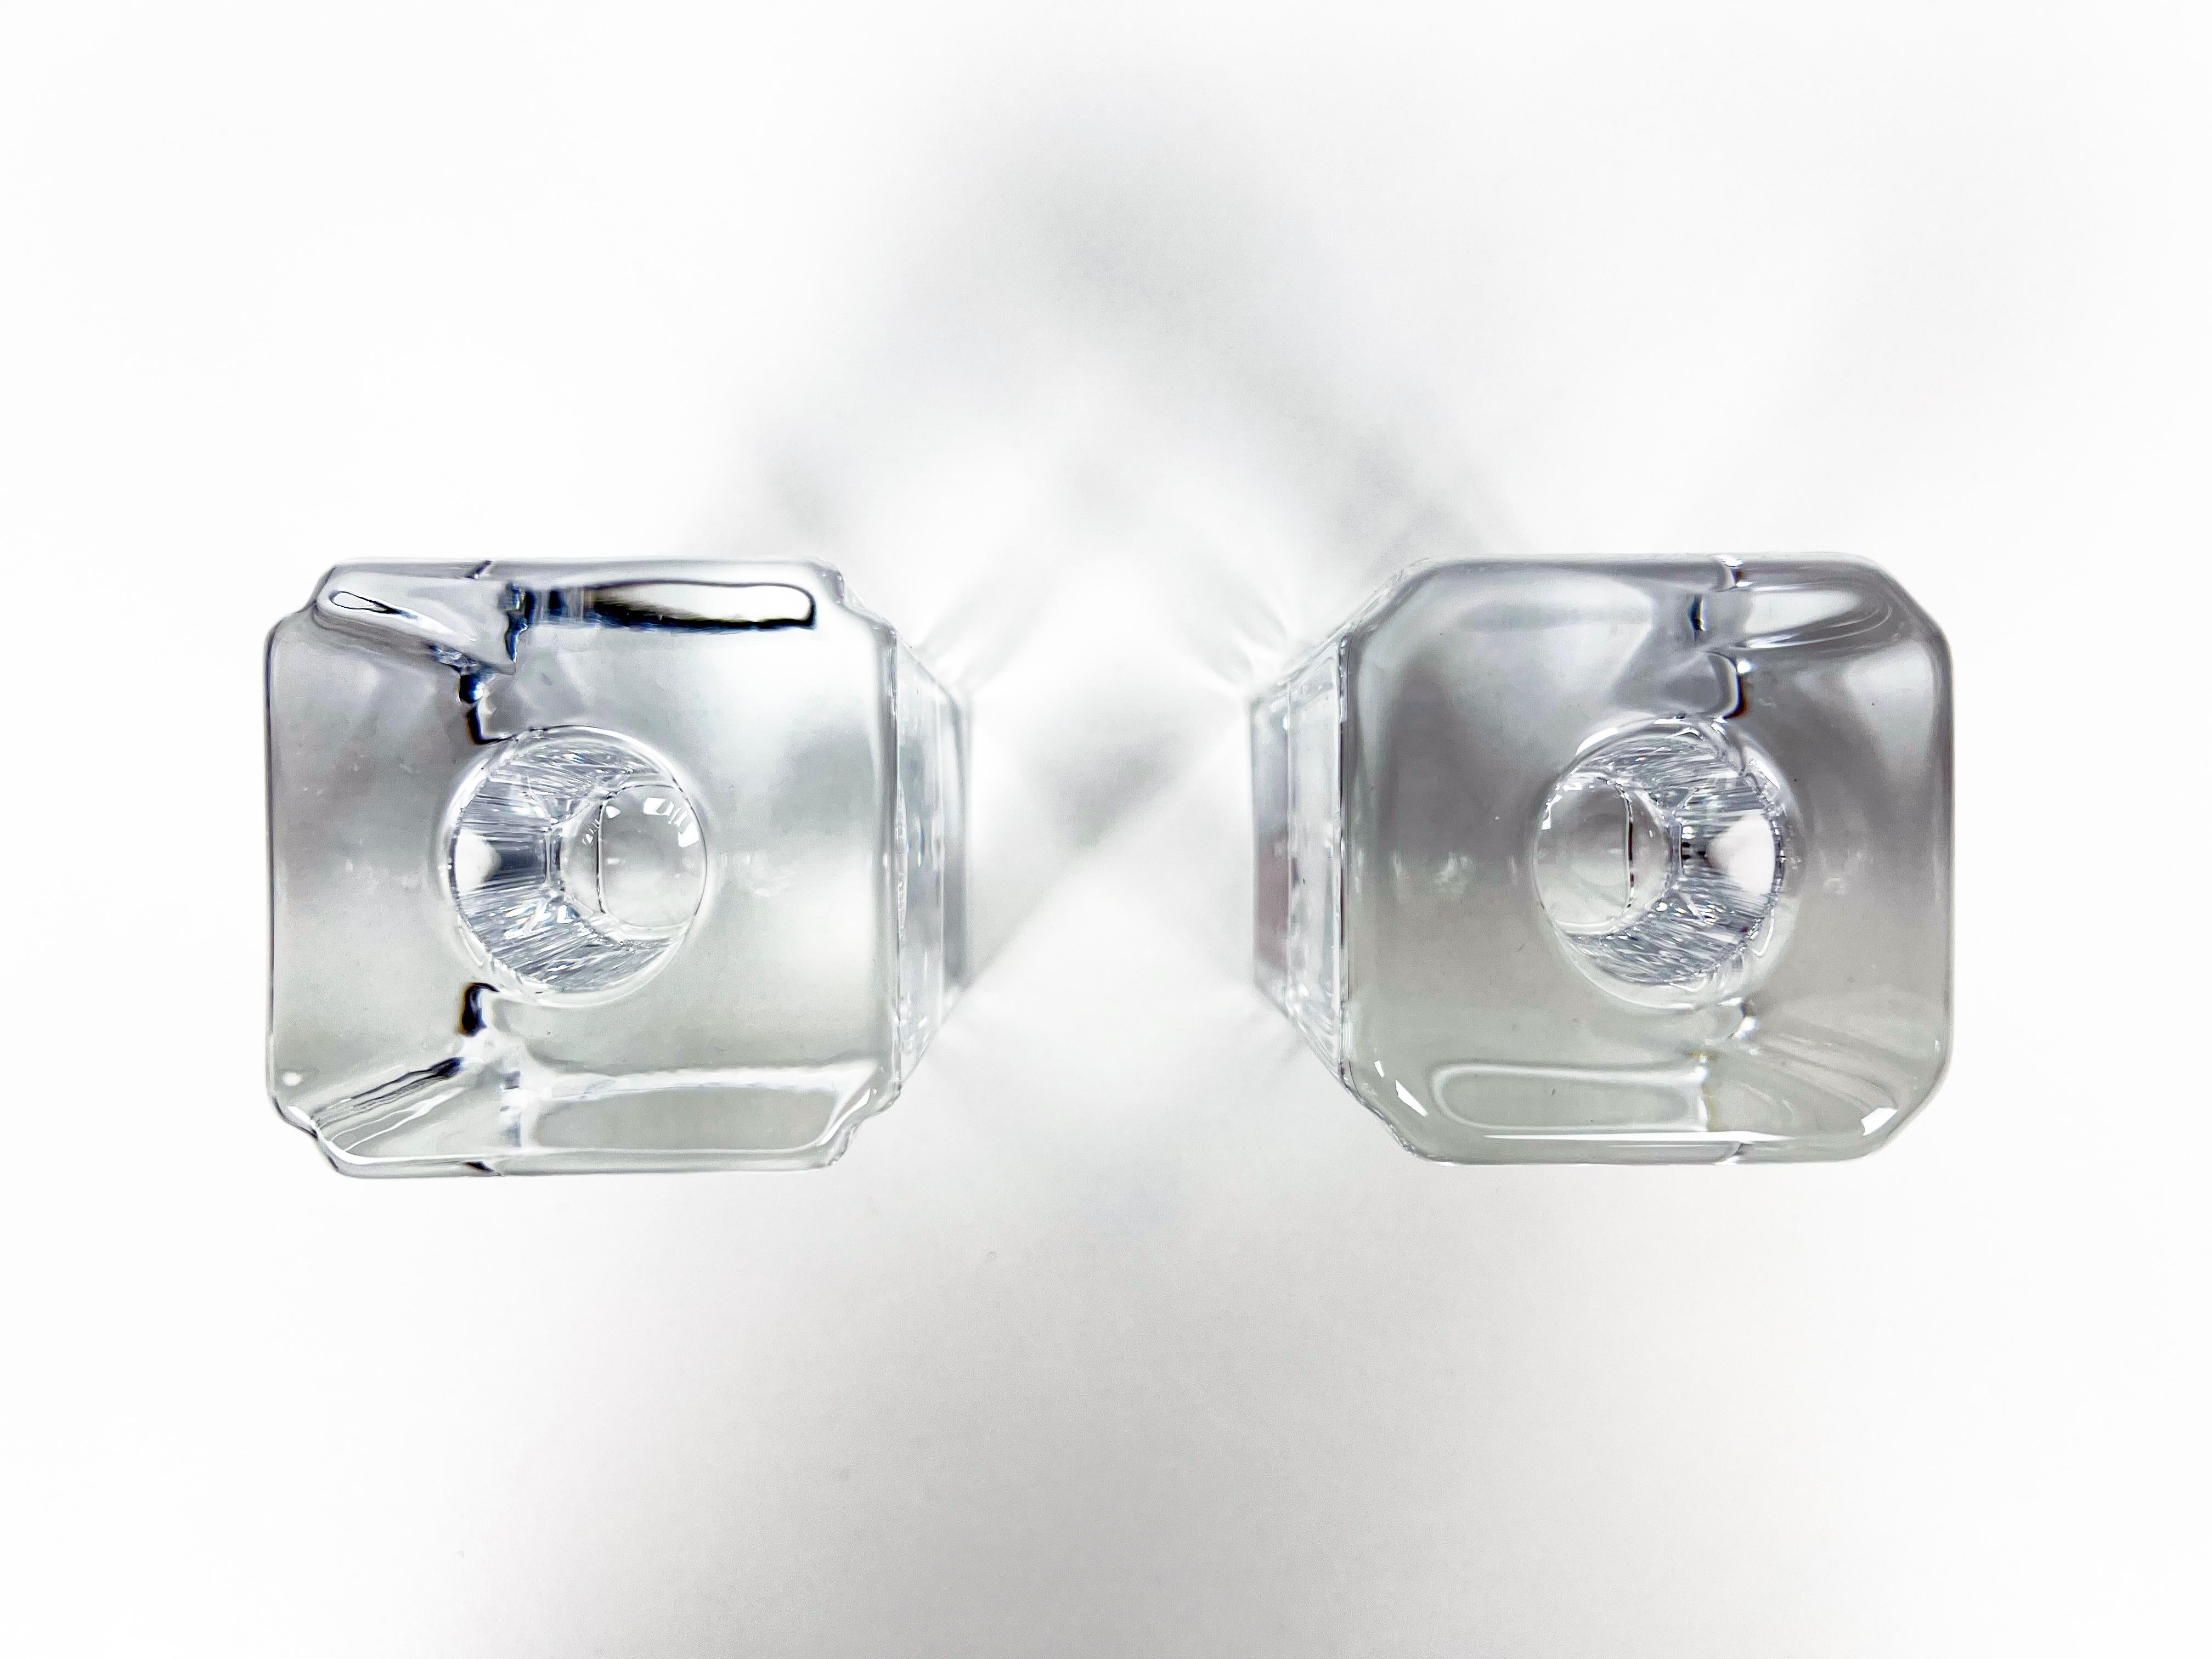 Scandinavian Modern Kosta Boda Crystal Candle Holders by Anna Ehrner, a Pair For Sale